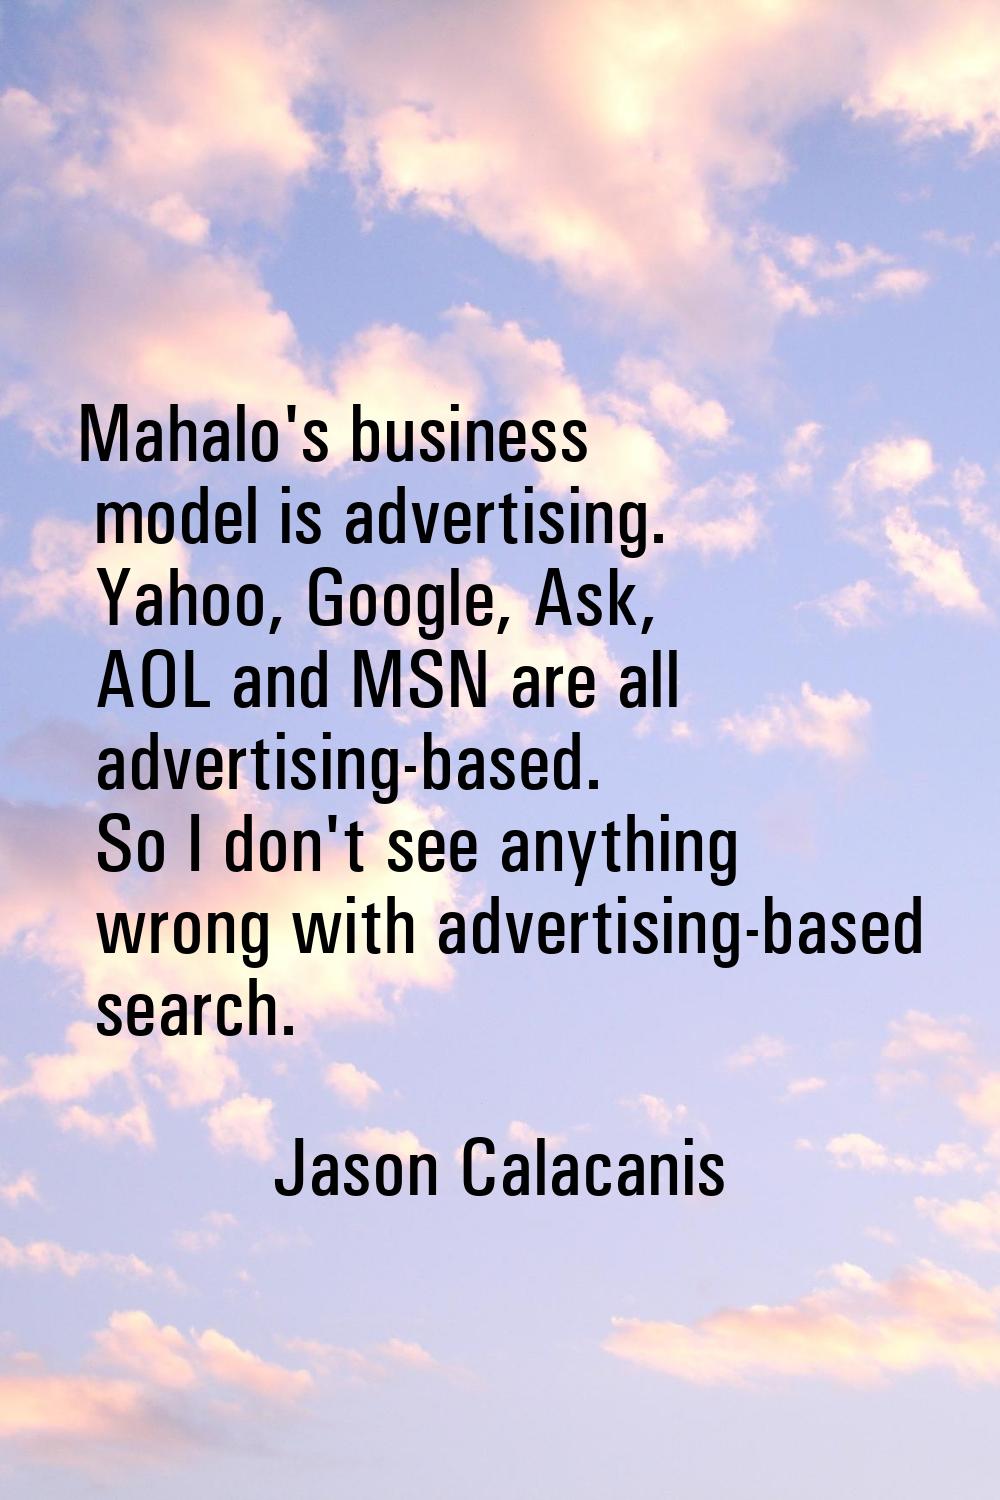 Mahalo's business model is advertising. Yahoo, Google, Ask, AOL and MSN are all advertising-based. 